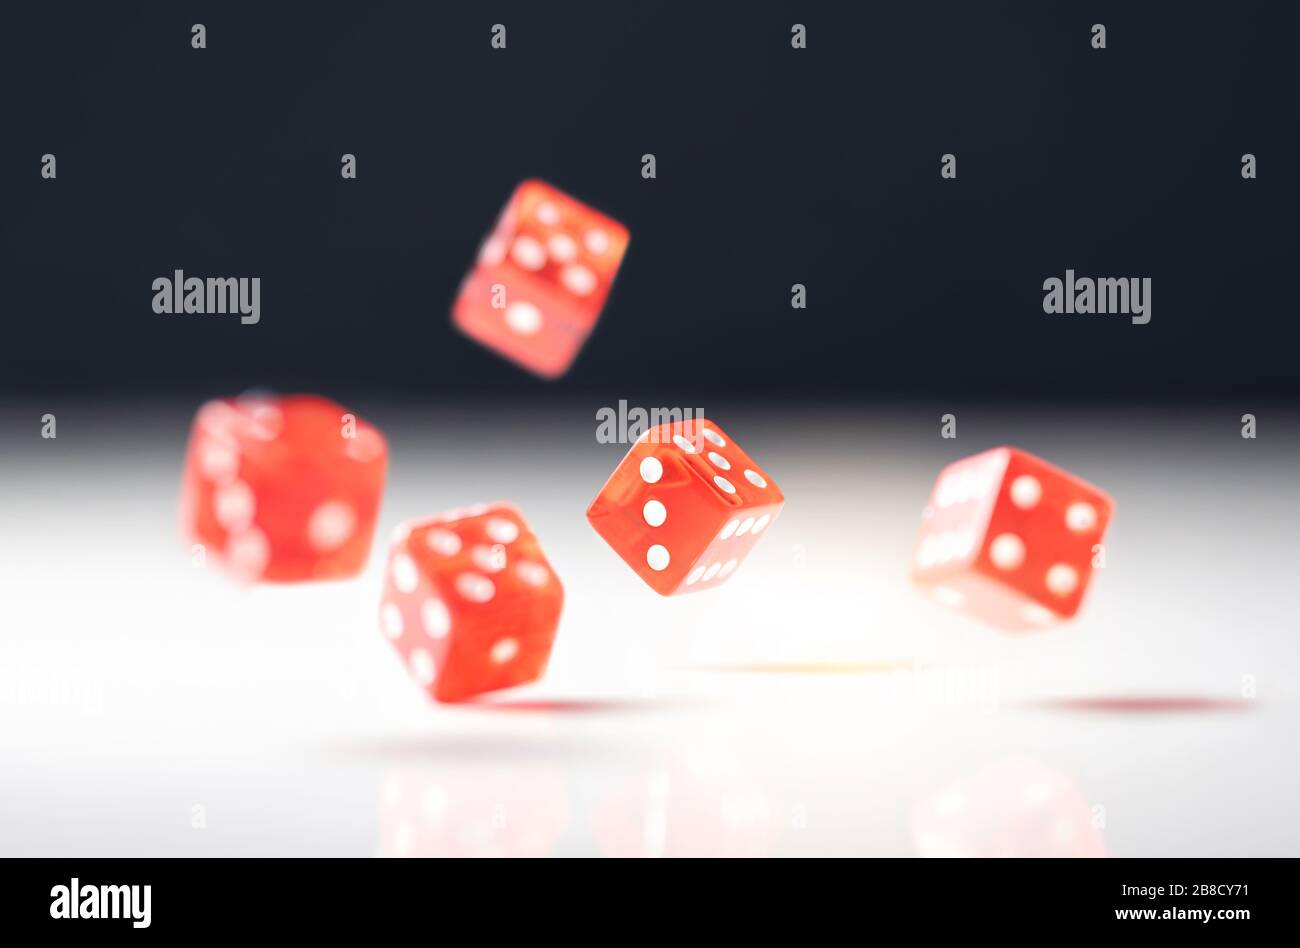 Roll the dice. Risk, luck, gambling, betting or addiction concept. Throwing five red casino and poker dice on table. Stock Photo